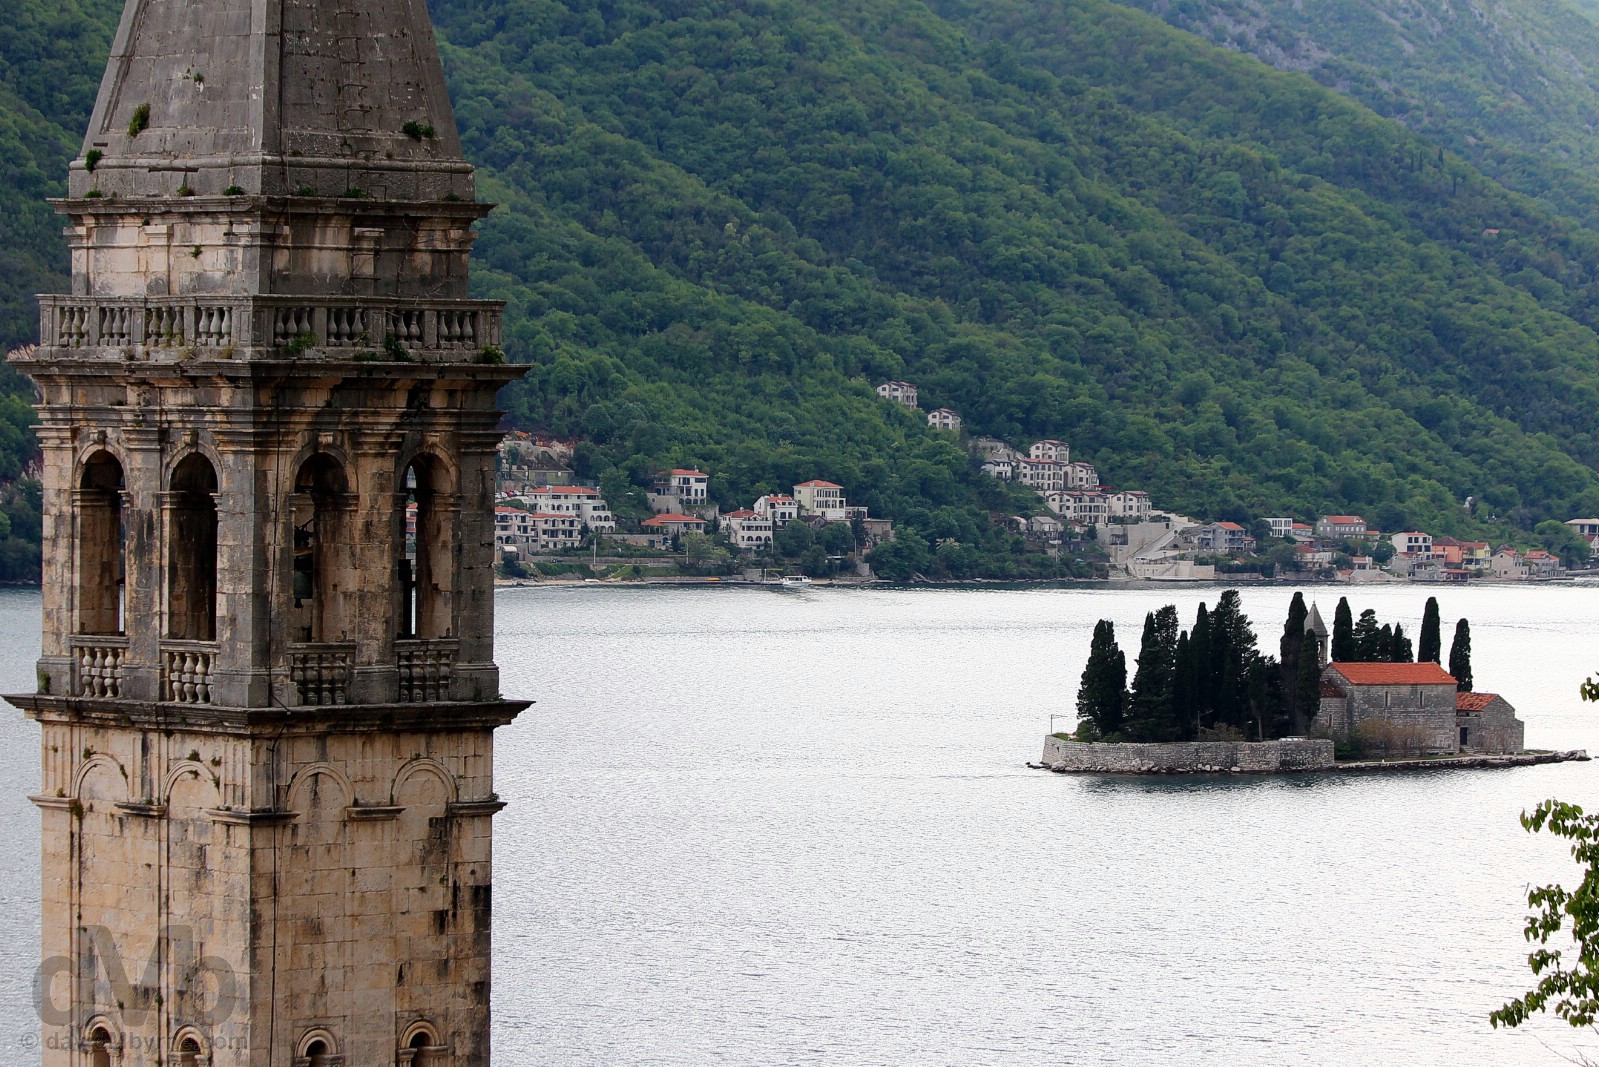 The spire of the 17th century St. Nicholas Church and the natural Sveti Dorde (Island of St. George, home to the 12th-century Saint George Benedictine monastery) off the coast of Perast, Bay of Kotor, Montenegro. April 19, 2017.